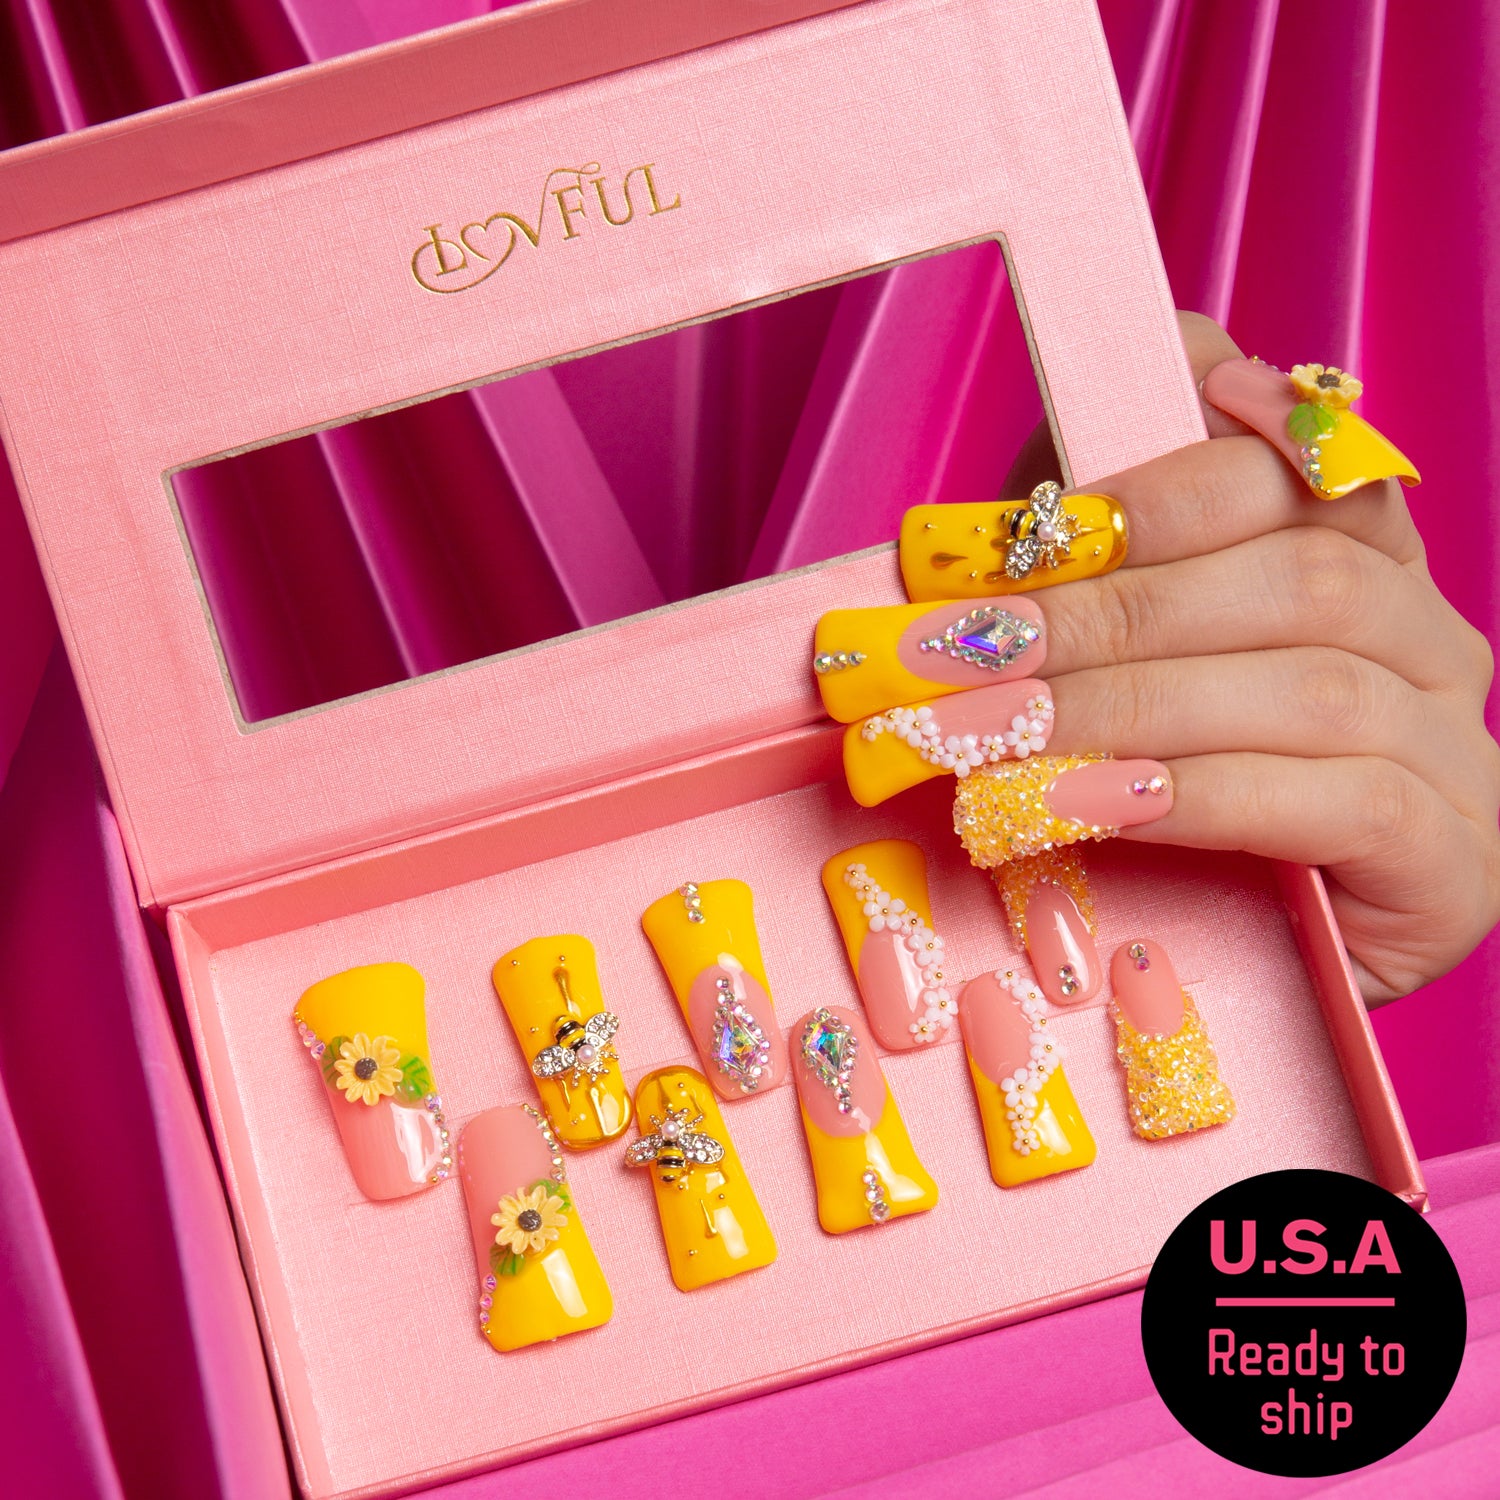 Set of bright yellow press-on nails in a pink box, featuring sunflower patterns, bee accents, and rhinestones. Hand holding one nail, with 'U.S.A Ready to ship' text sticker.